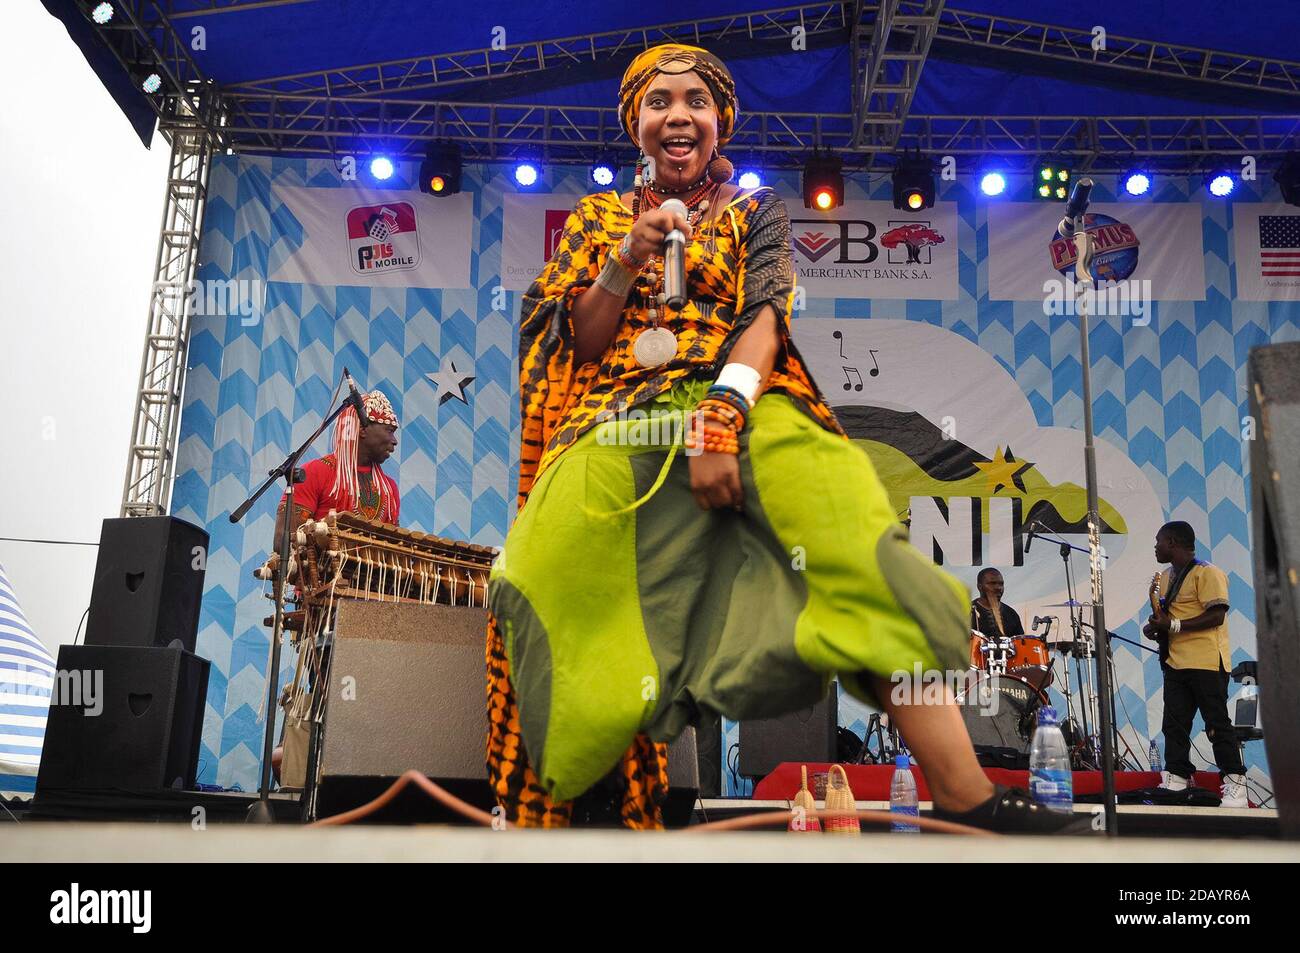 Yvonne Mwale, a singer from Zambia, performs music on a stage in Democratic Republic of Congo. Stock Photo